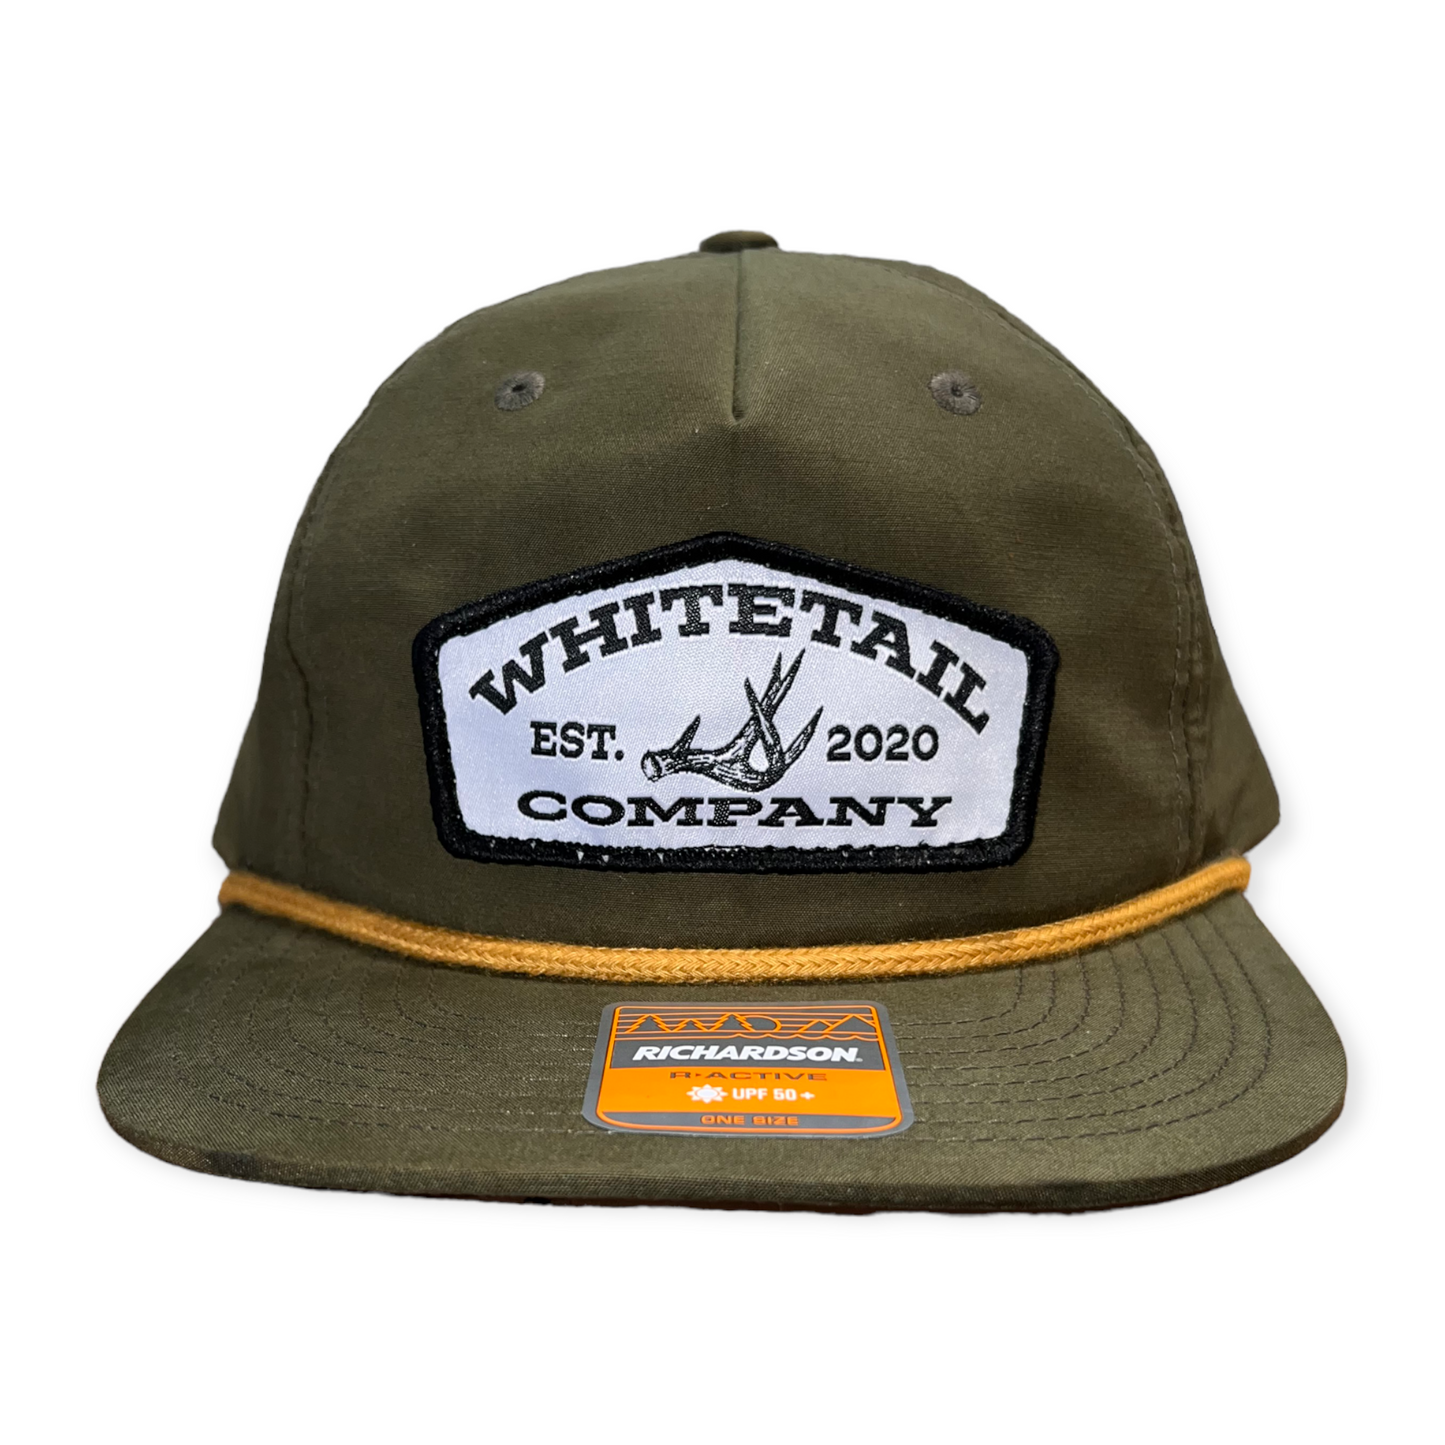 Whitetail Co. Richardson Ropy Shed Patch